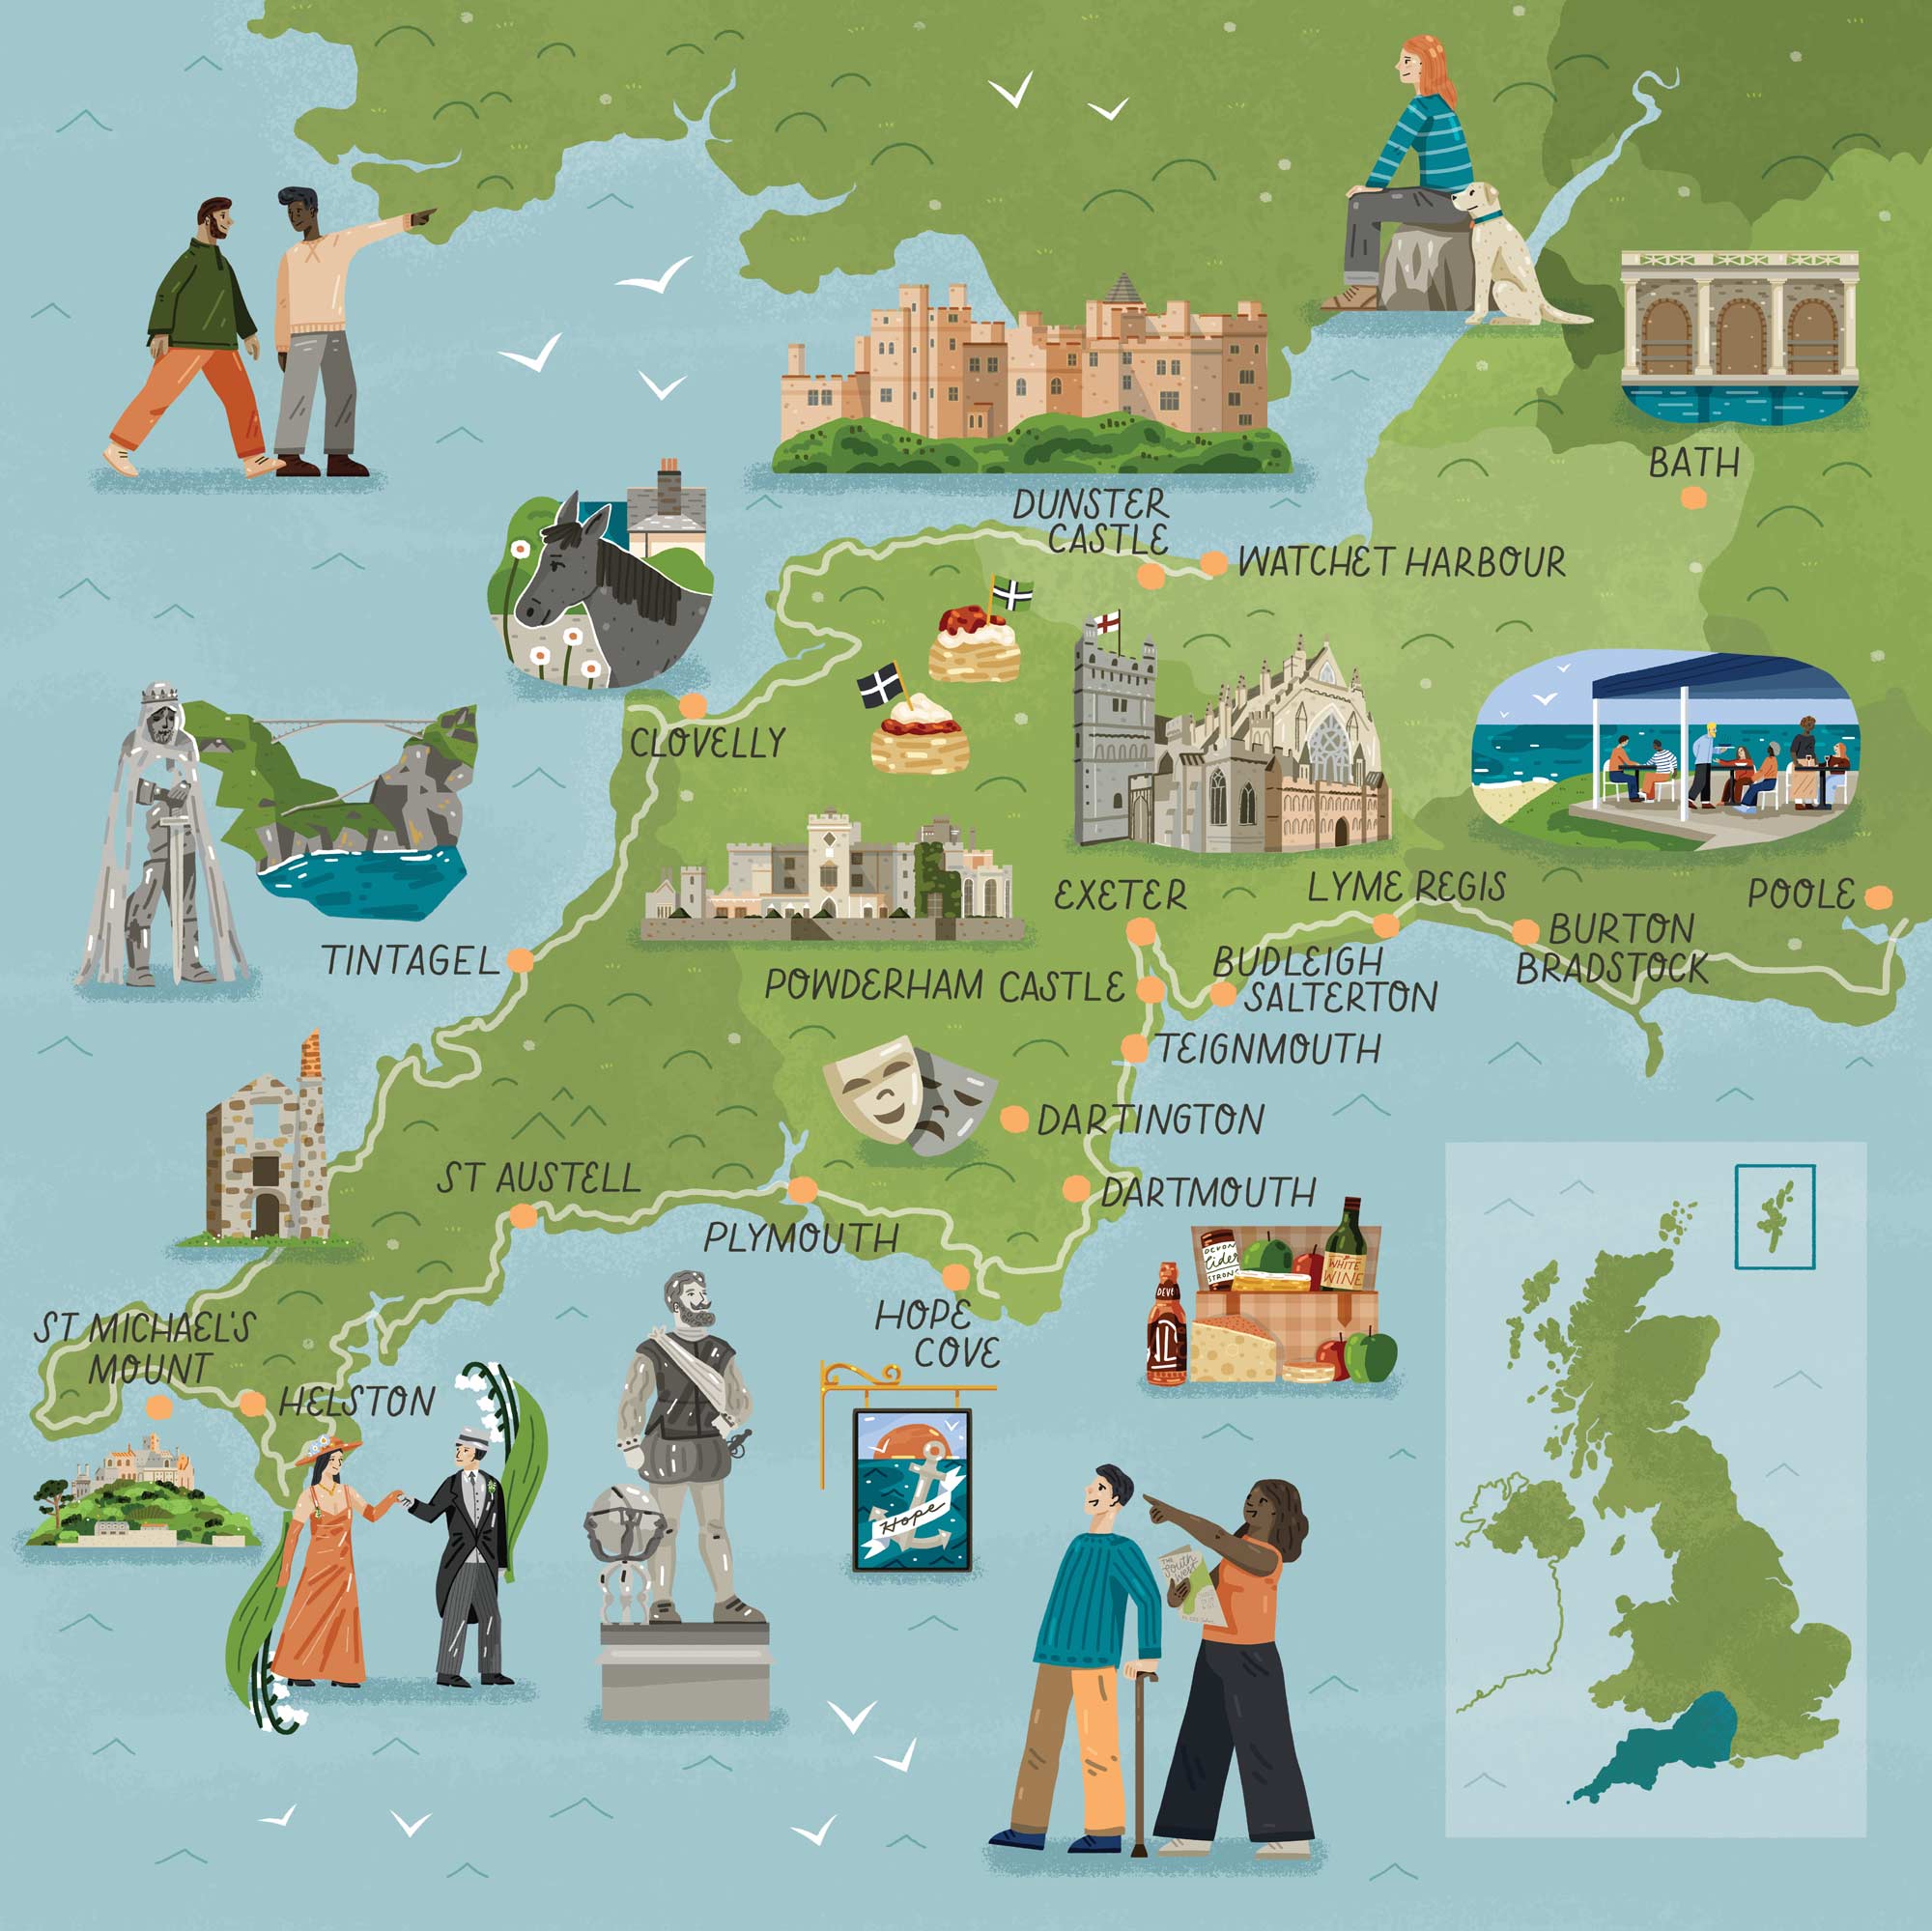 A map of the South West of the UK for Discover Britain Magazine, by Elly Jahnz